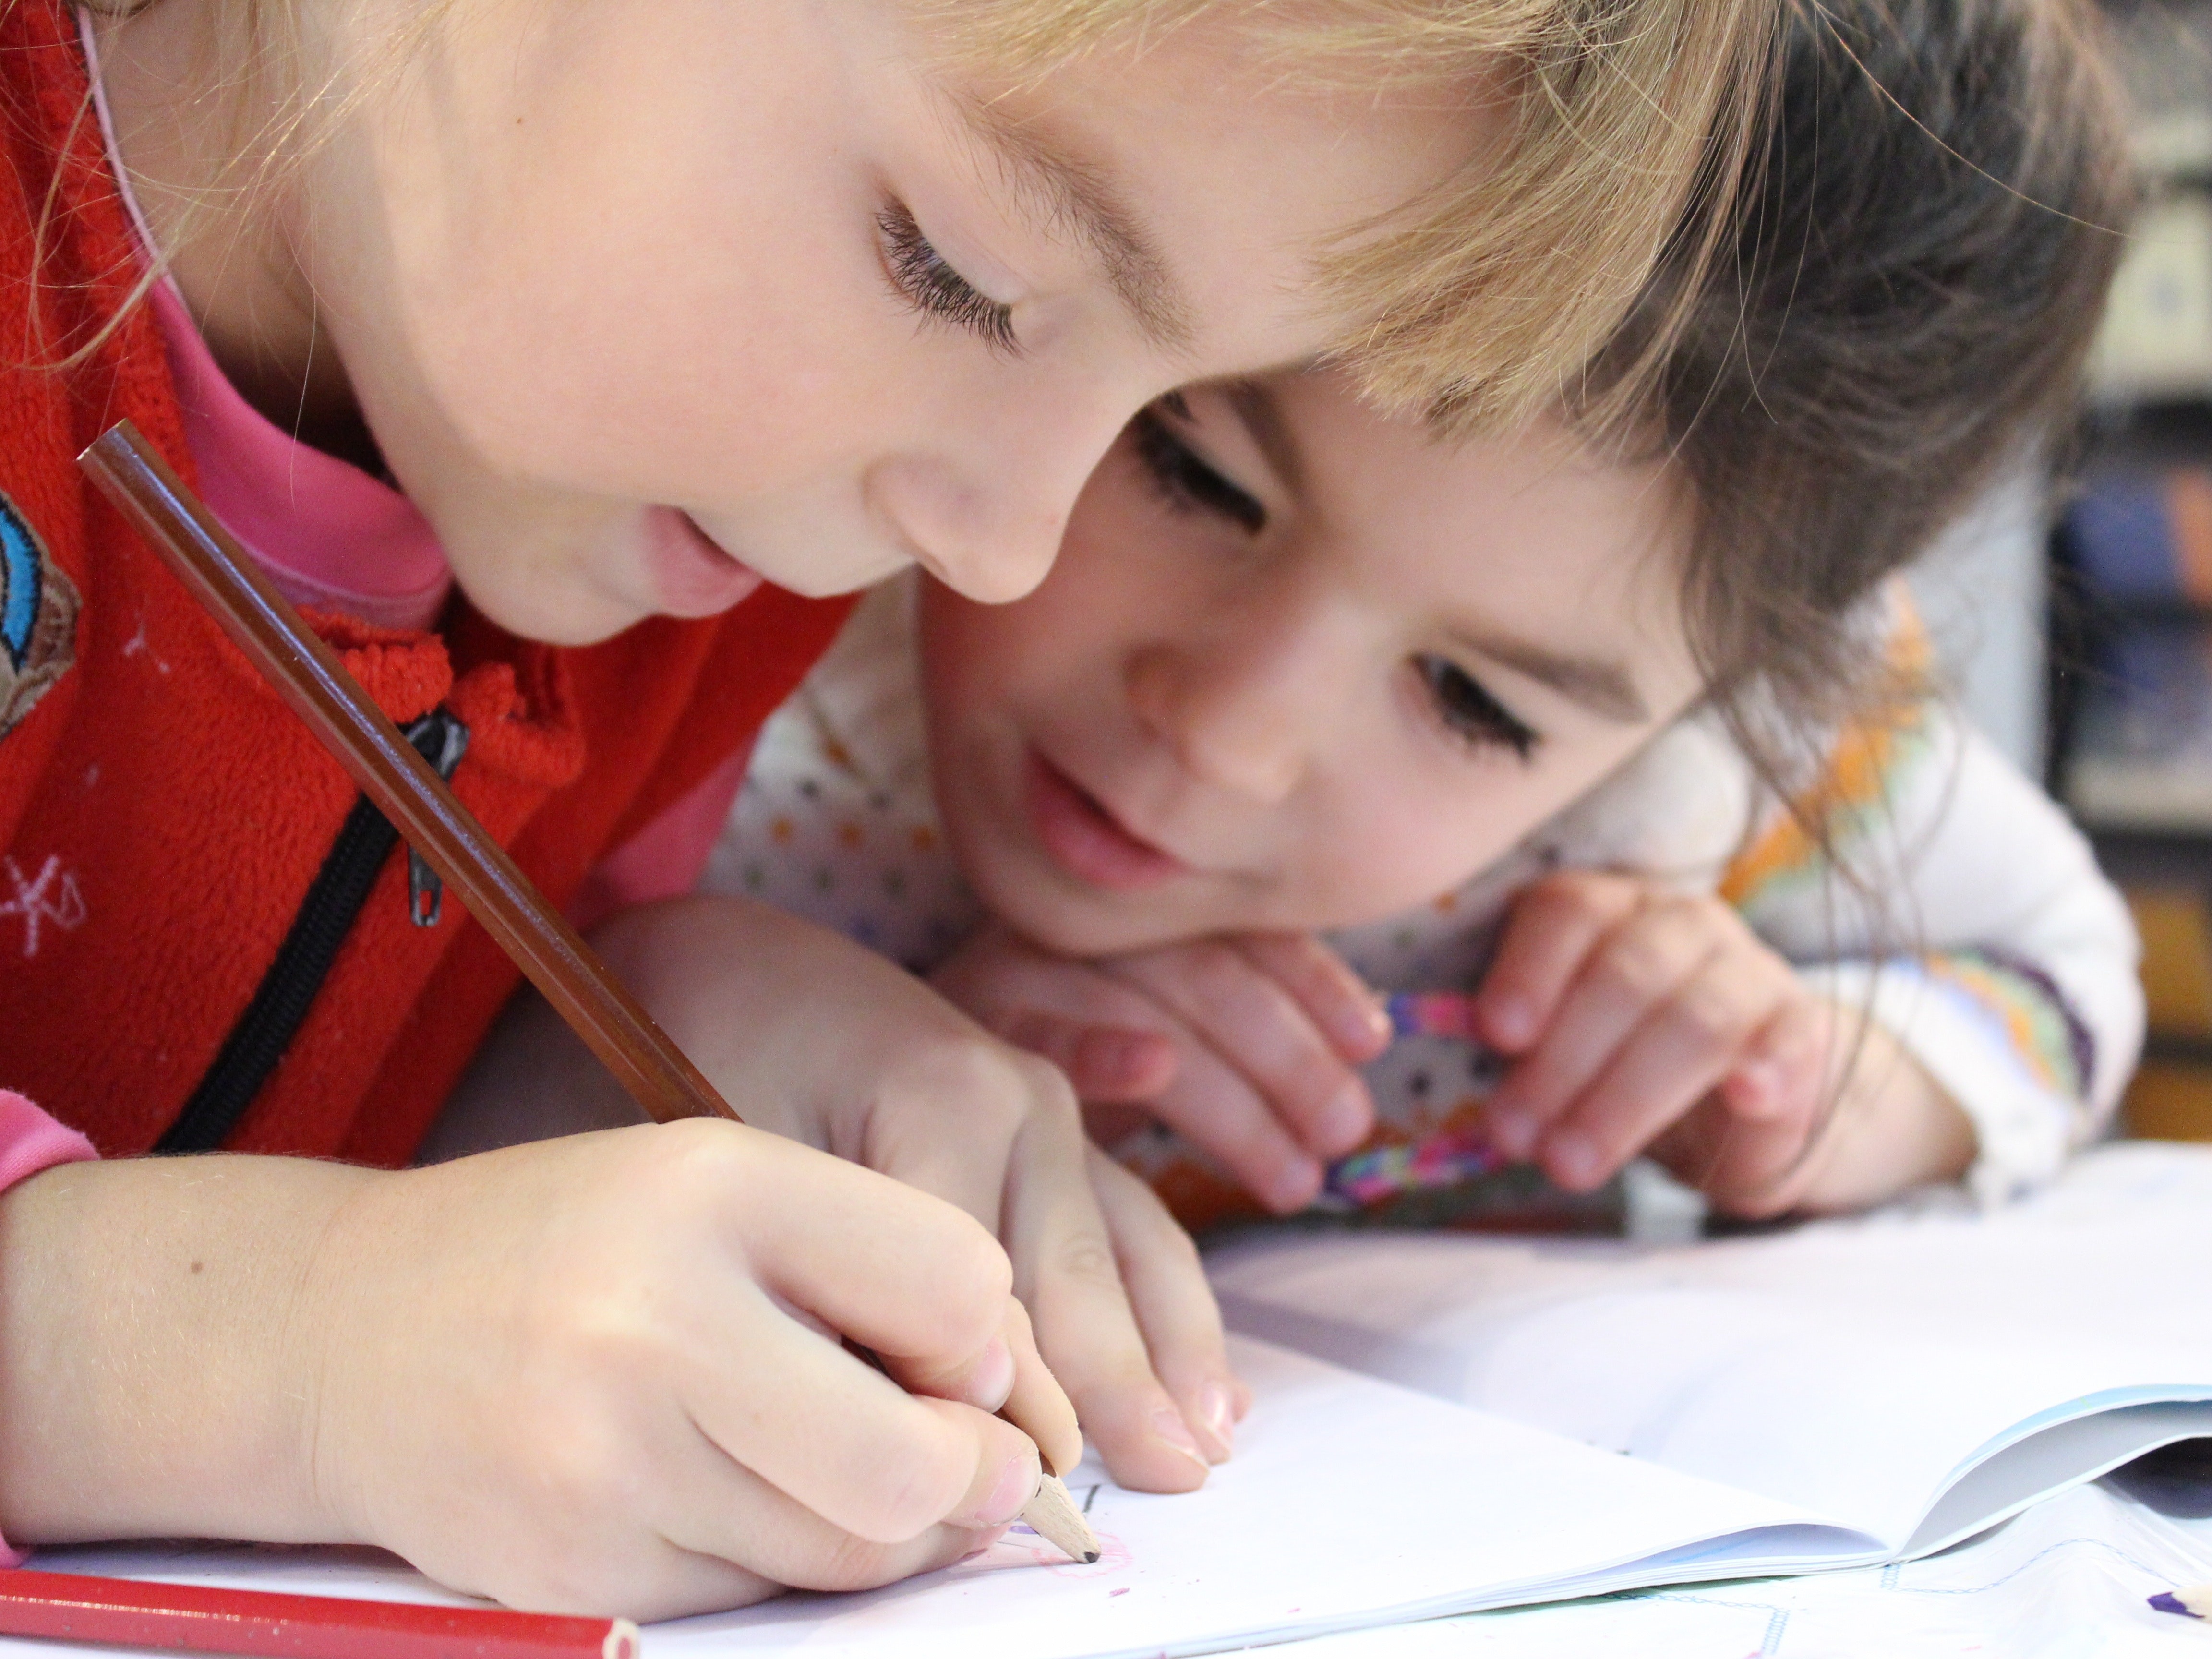 Two children drawing together